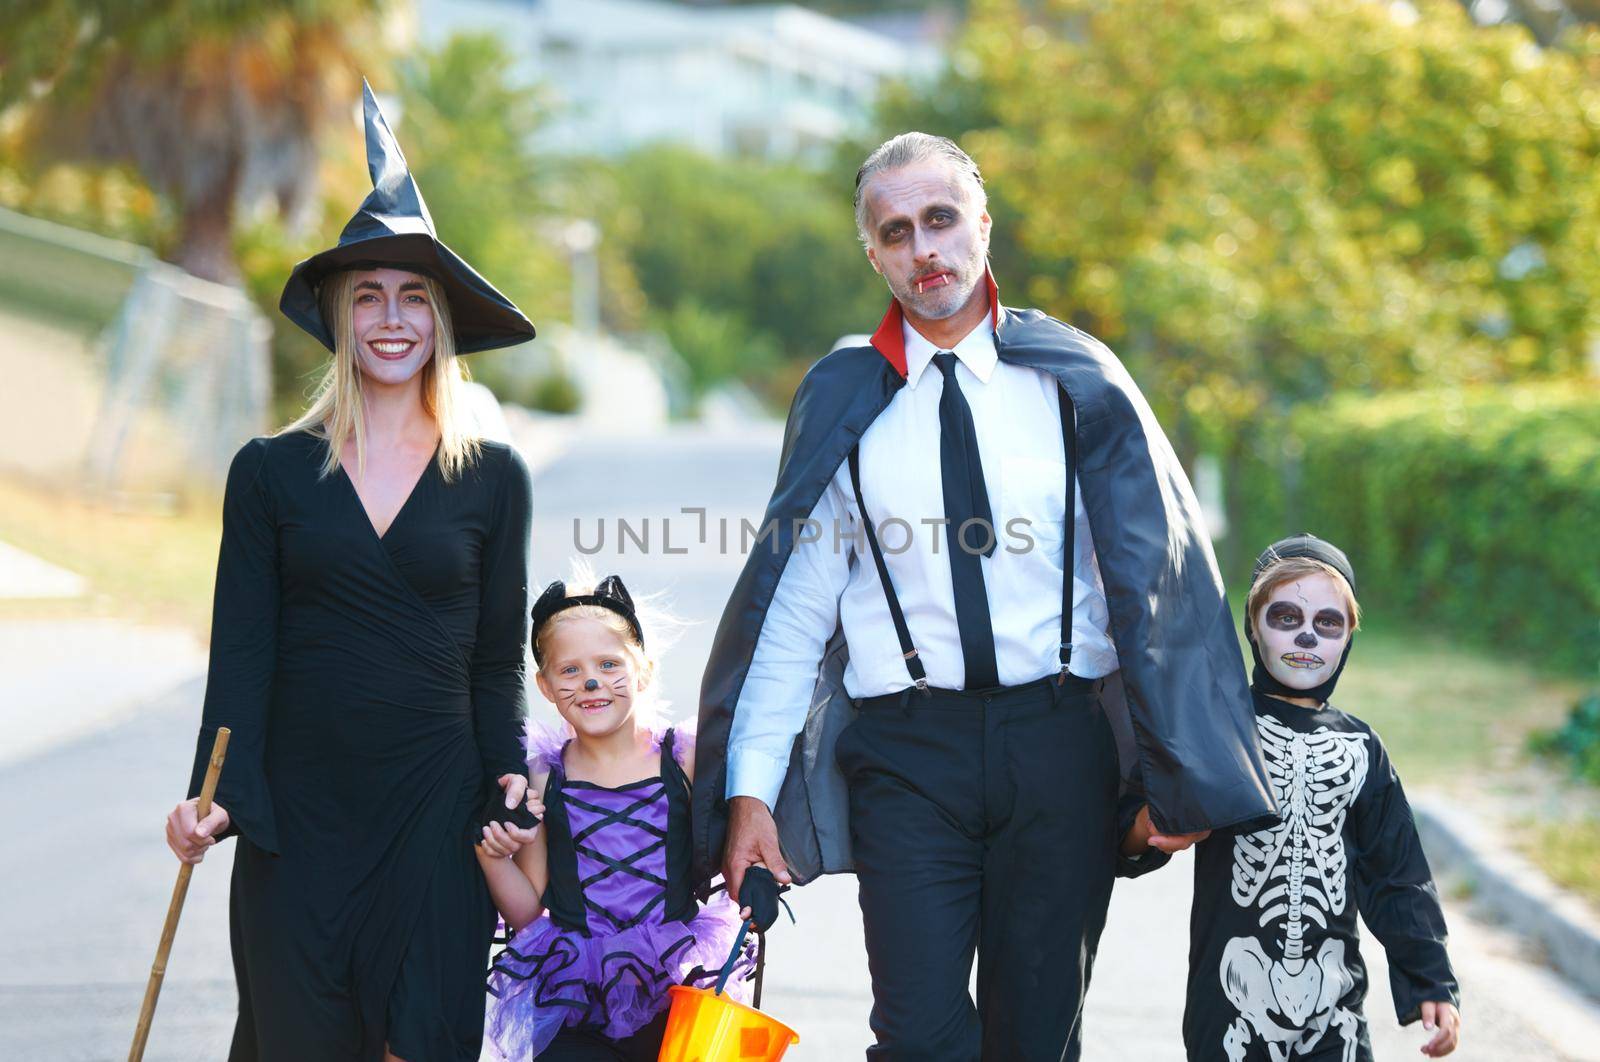 Celebrating the fun together. A cute family dressed up for Halloween walking down their street. by YuriArcurs